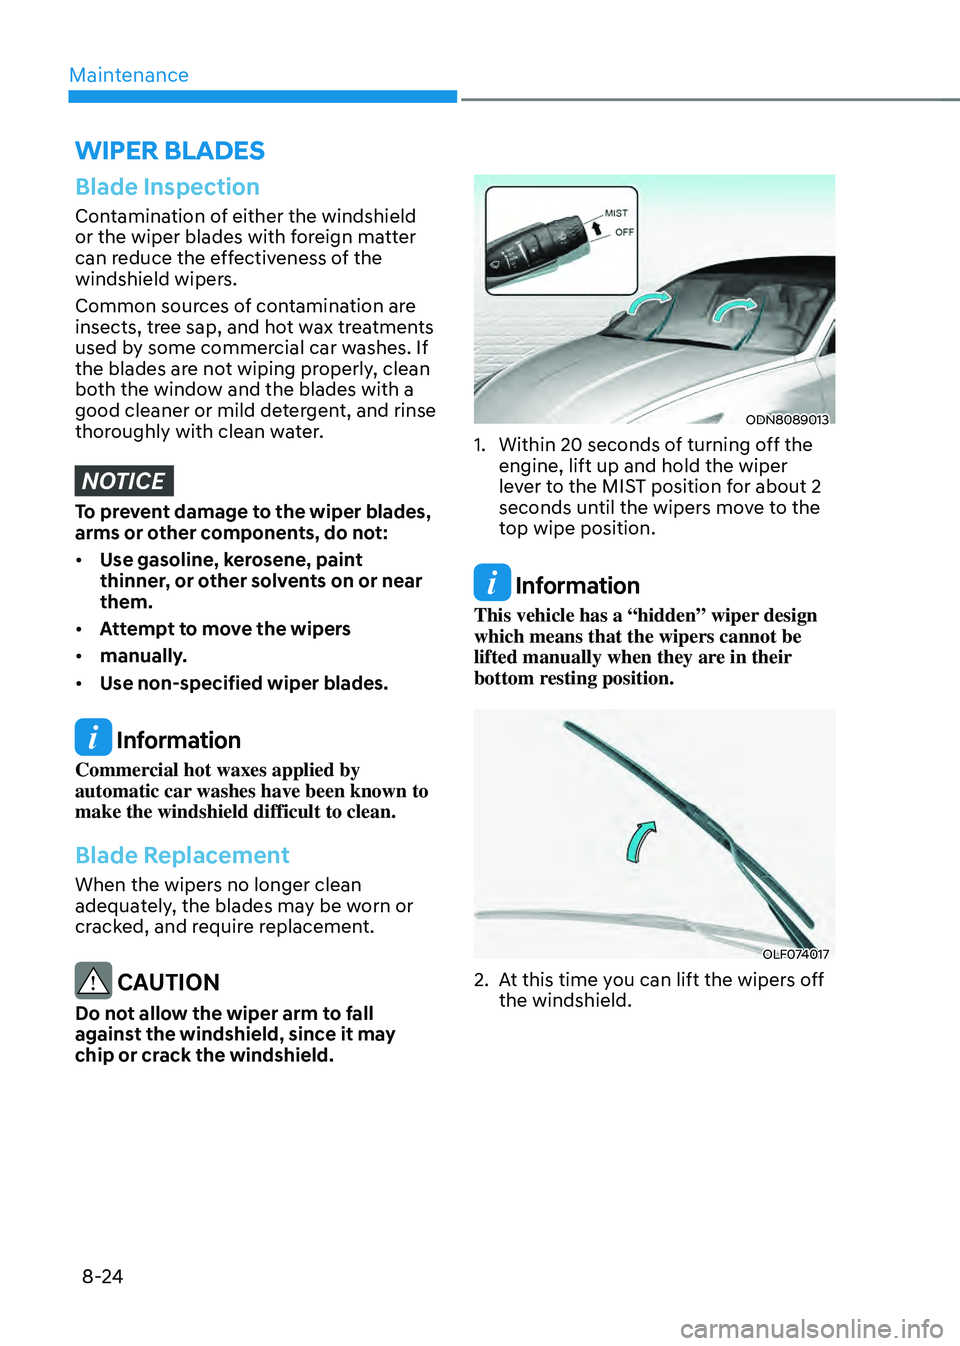 HYUNDAI SONATA HYBRID 2022  Owners Manual Maintenance
8-24
Blade Inspection
Contamination of either the windshield 
or the wiper blades with foreign matter 
can reduce the effectiveness of the 
windshield wipers.
Common sources of contaminati